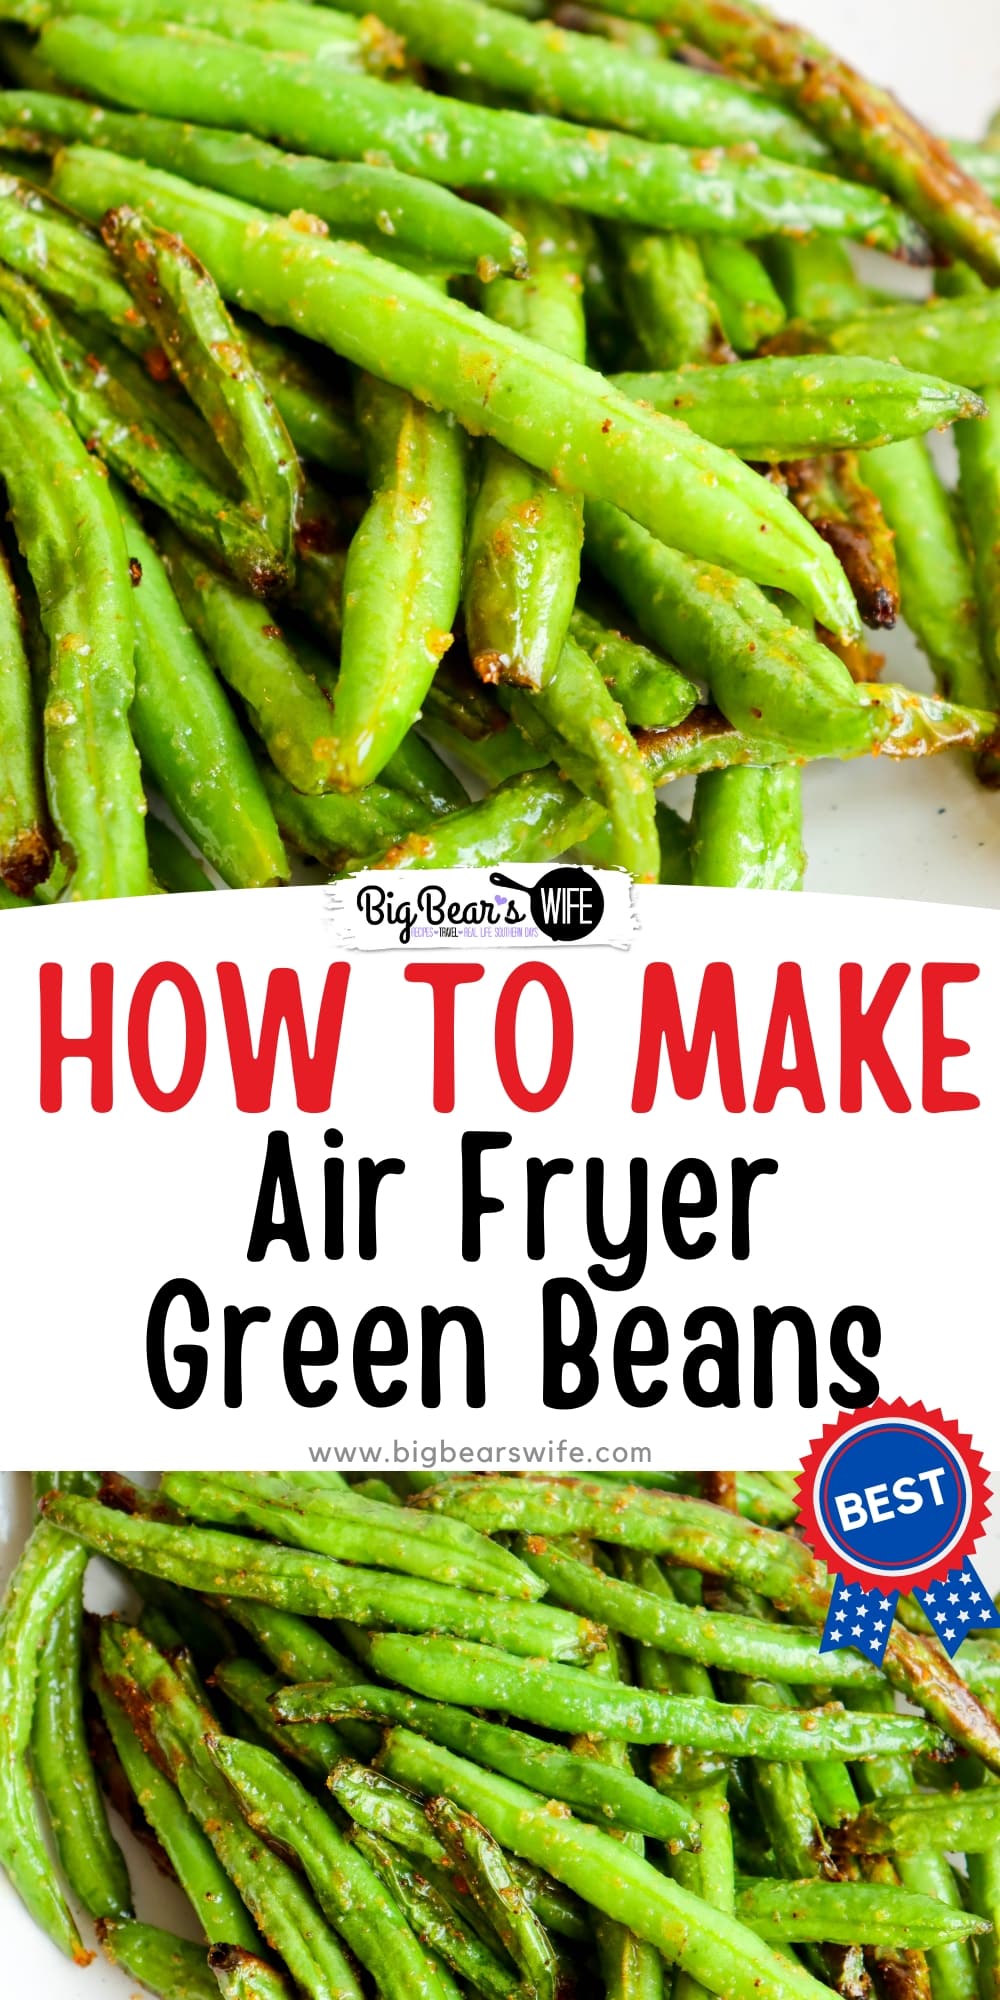 Need a quick and easy side dish for dinner or lunch? These Air Fryer Green Beans are so simple to make! via @bigbearswife